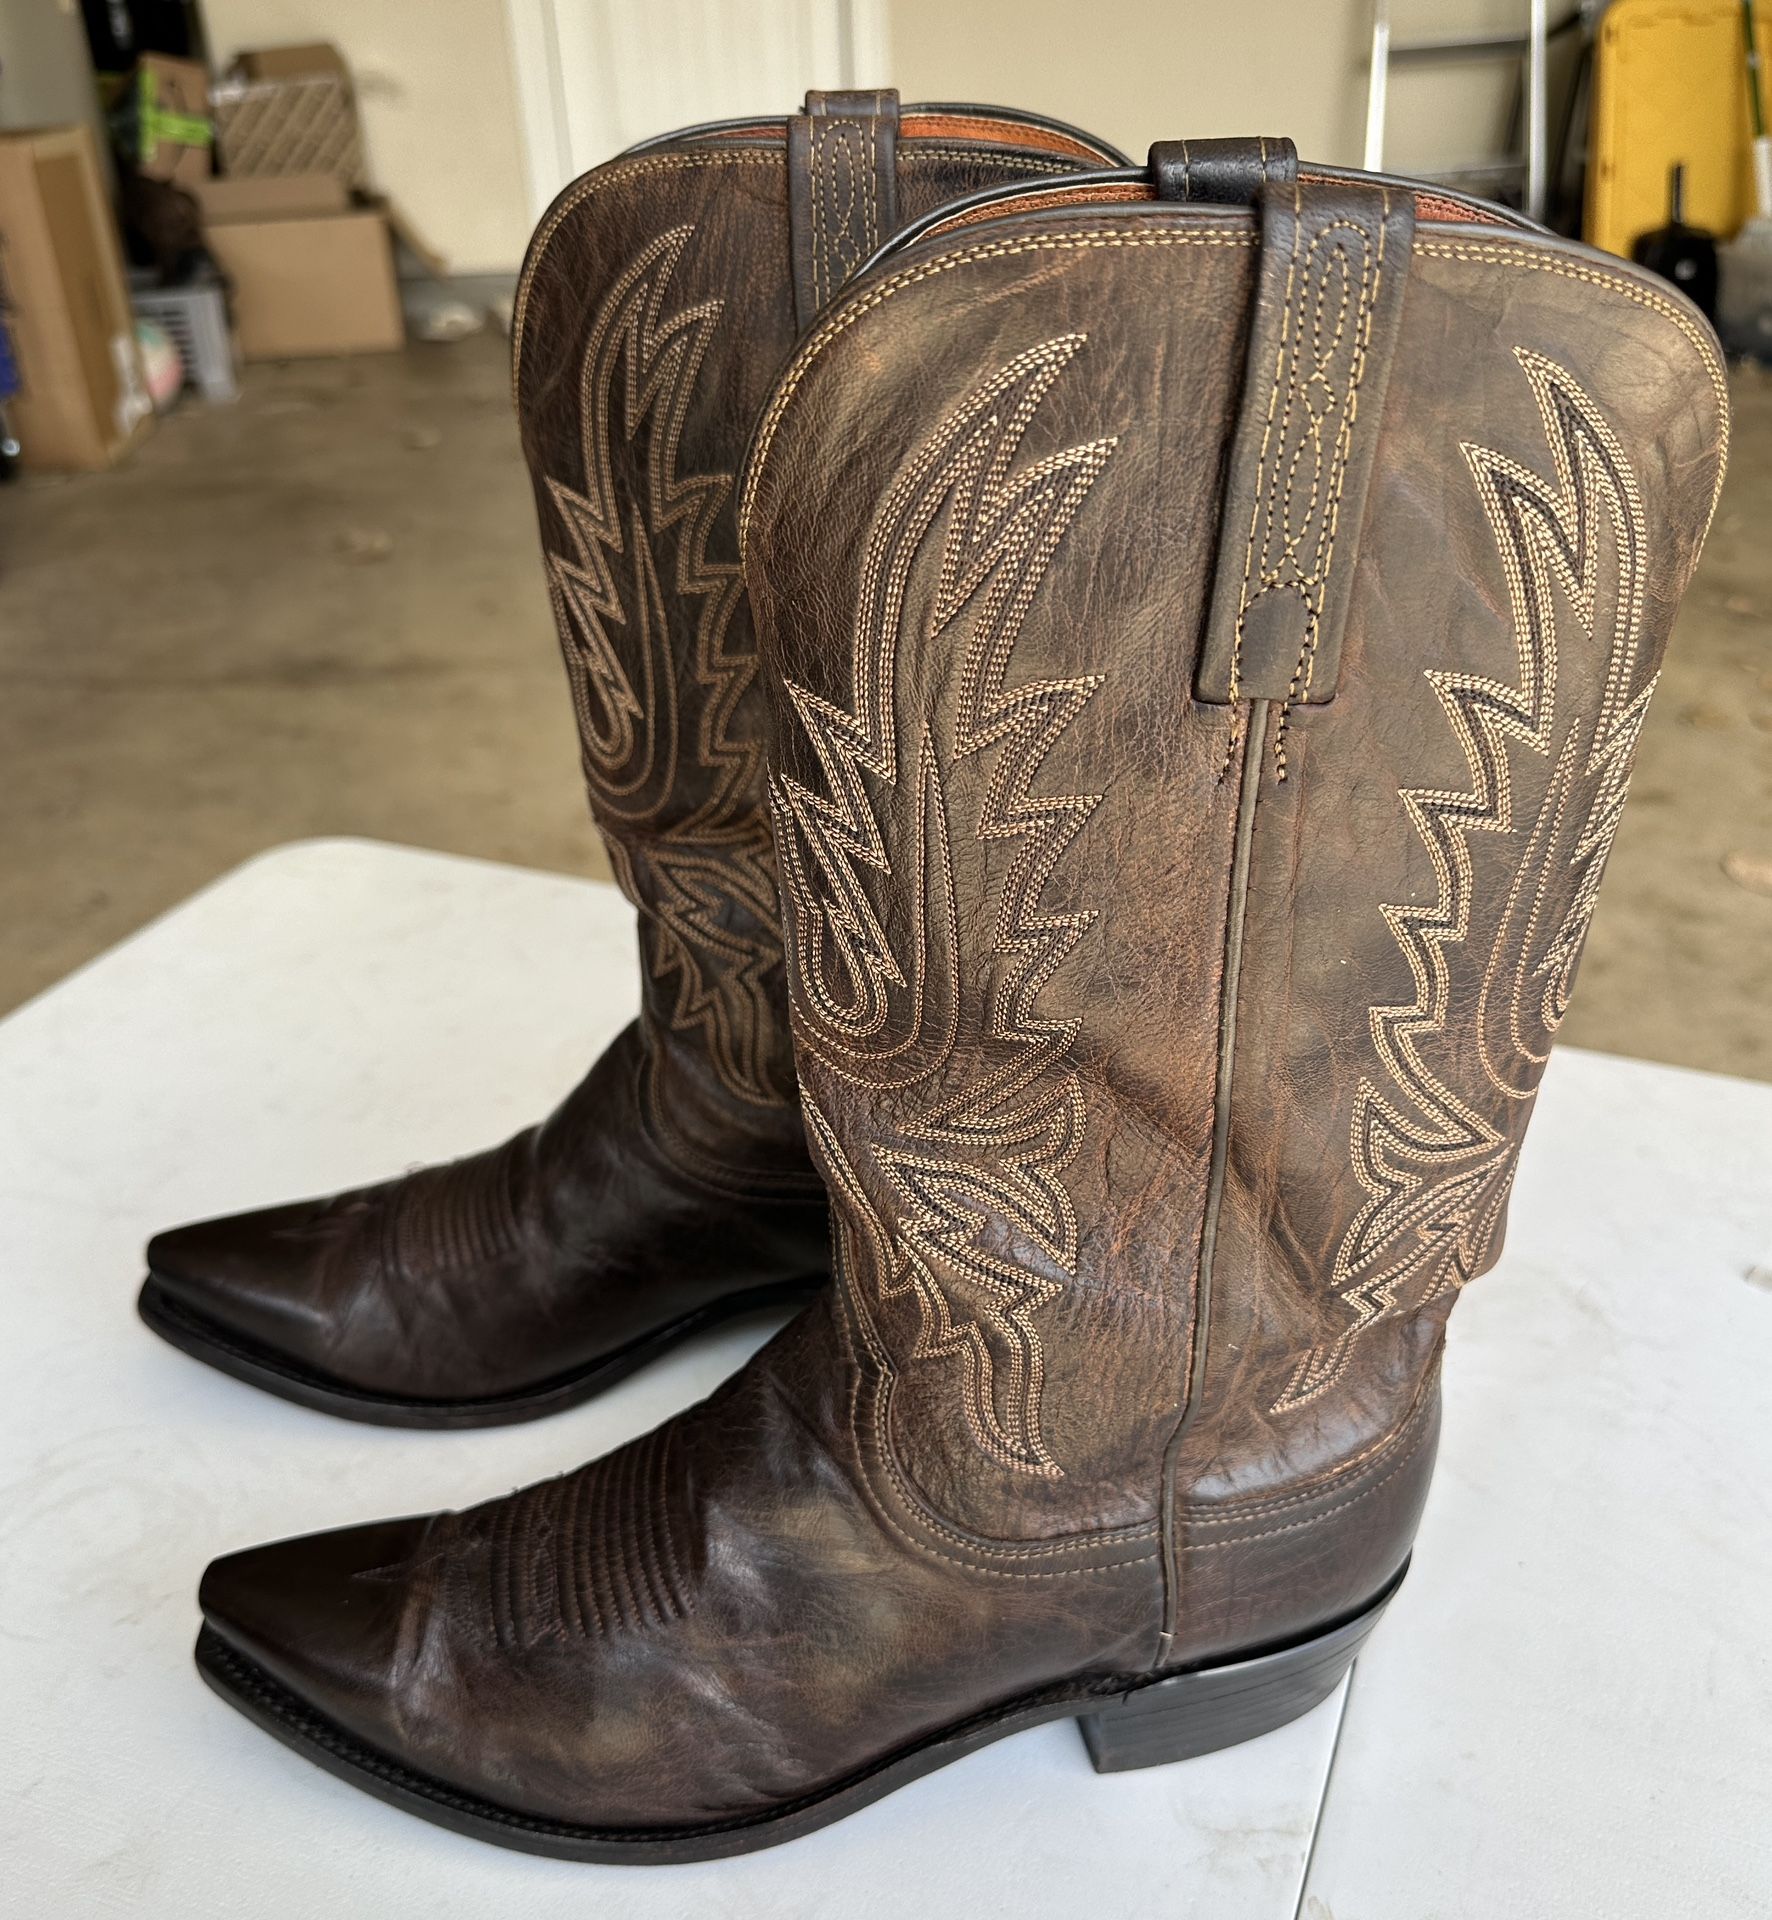 Men’s Lucchese boots